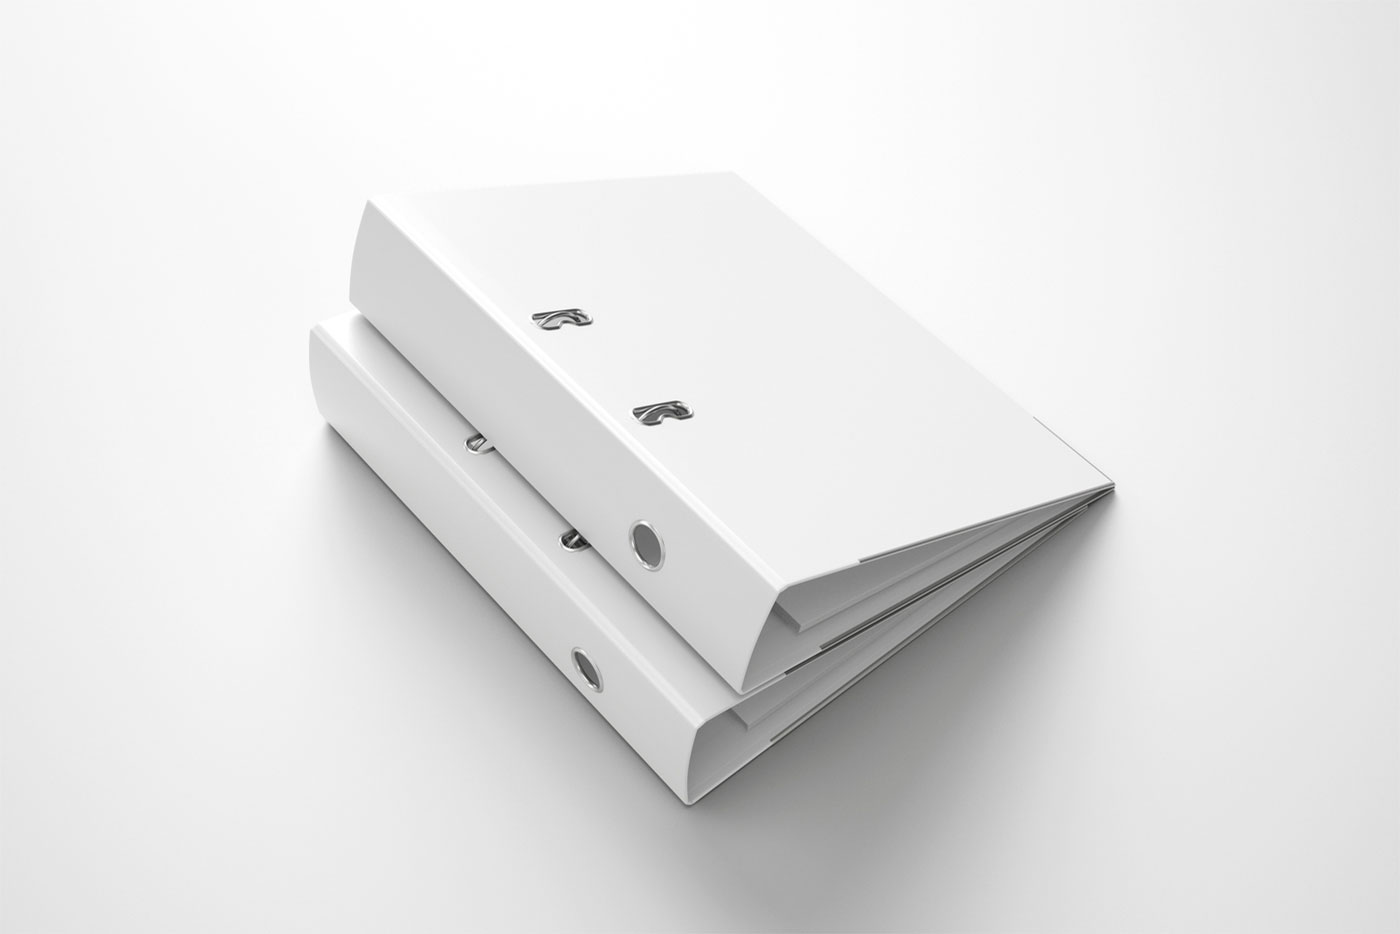 Mockup Featuring Two Binders Cover and Spine View FREE PSD